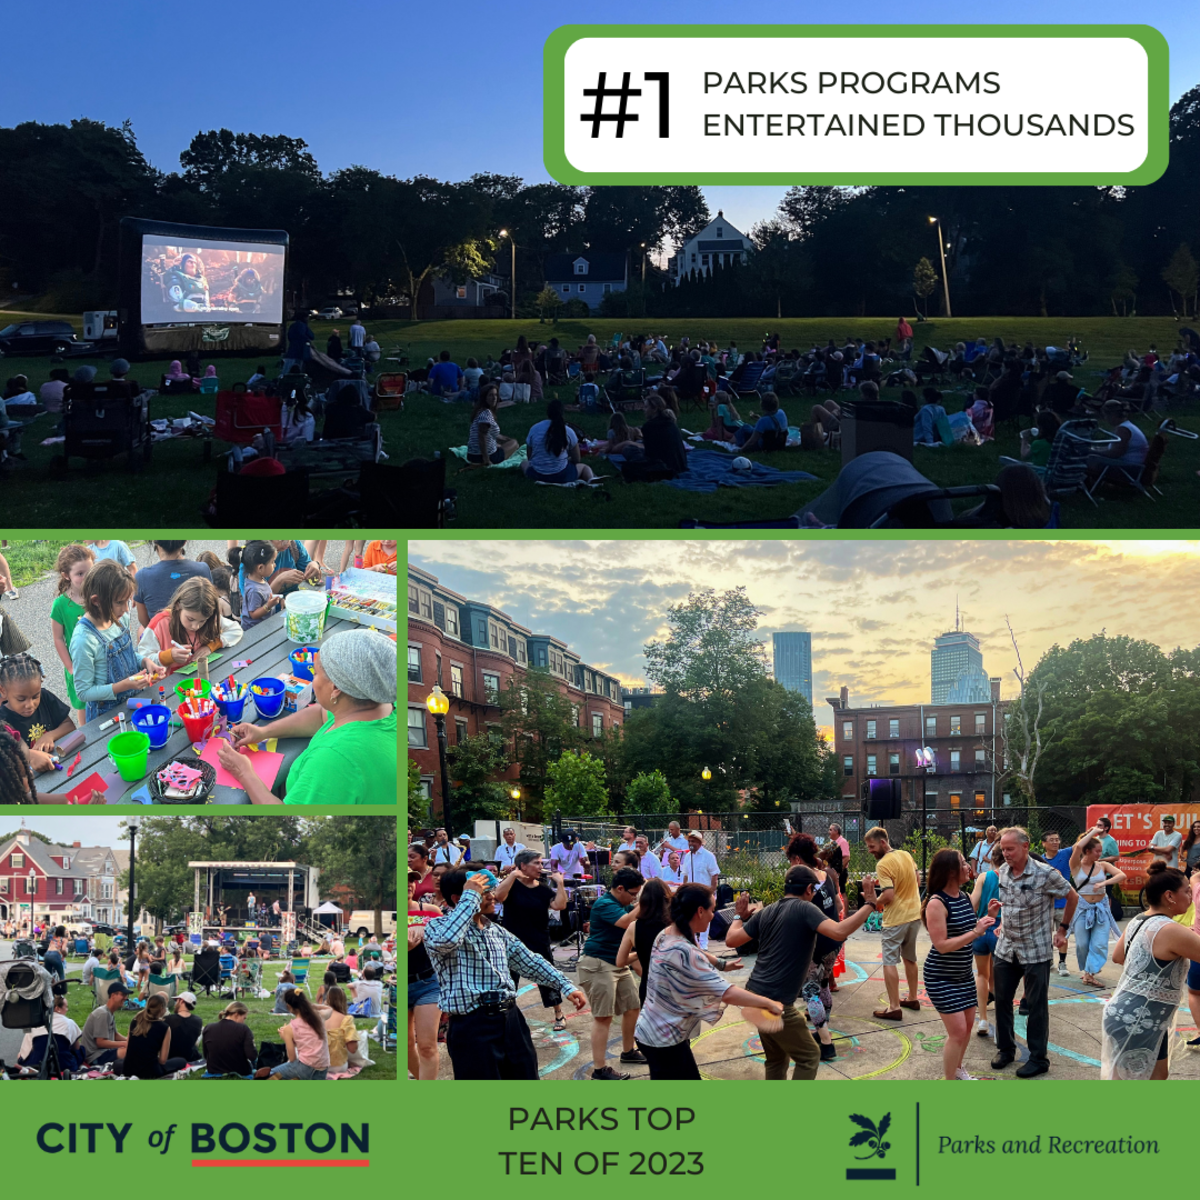 1. PARKS PROGRAMS AND EVENTS ENTERTAINED THOUSANDS - Concerts and movie nights. Arts and crafts and festivals.